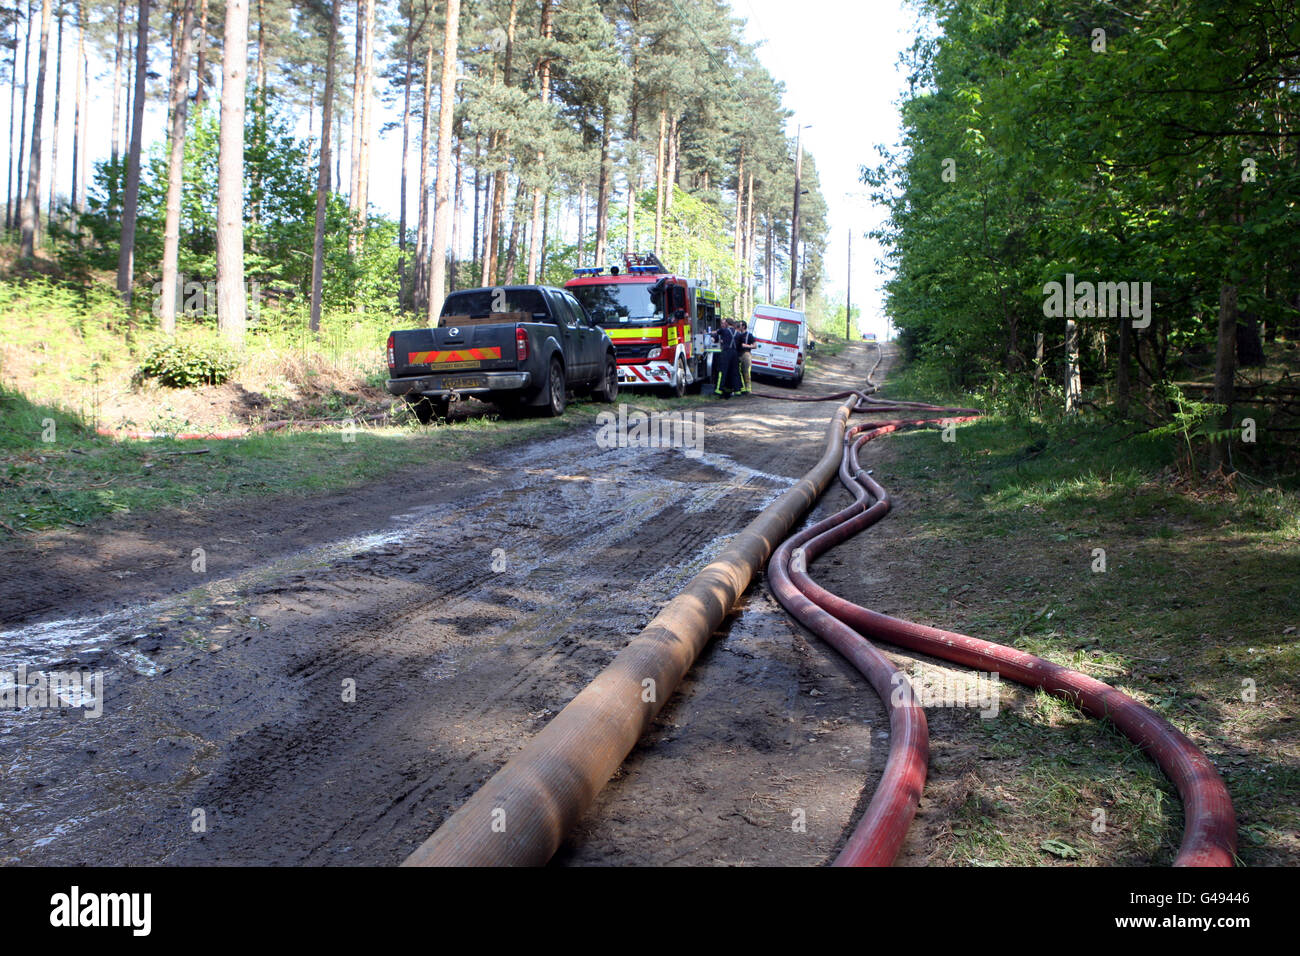 Firefighters work on a fire in the Swinley Forest near Crowthorne, Berkshire. Stock Photo